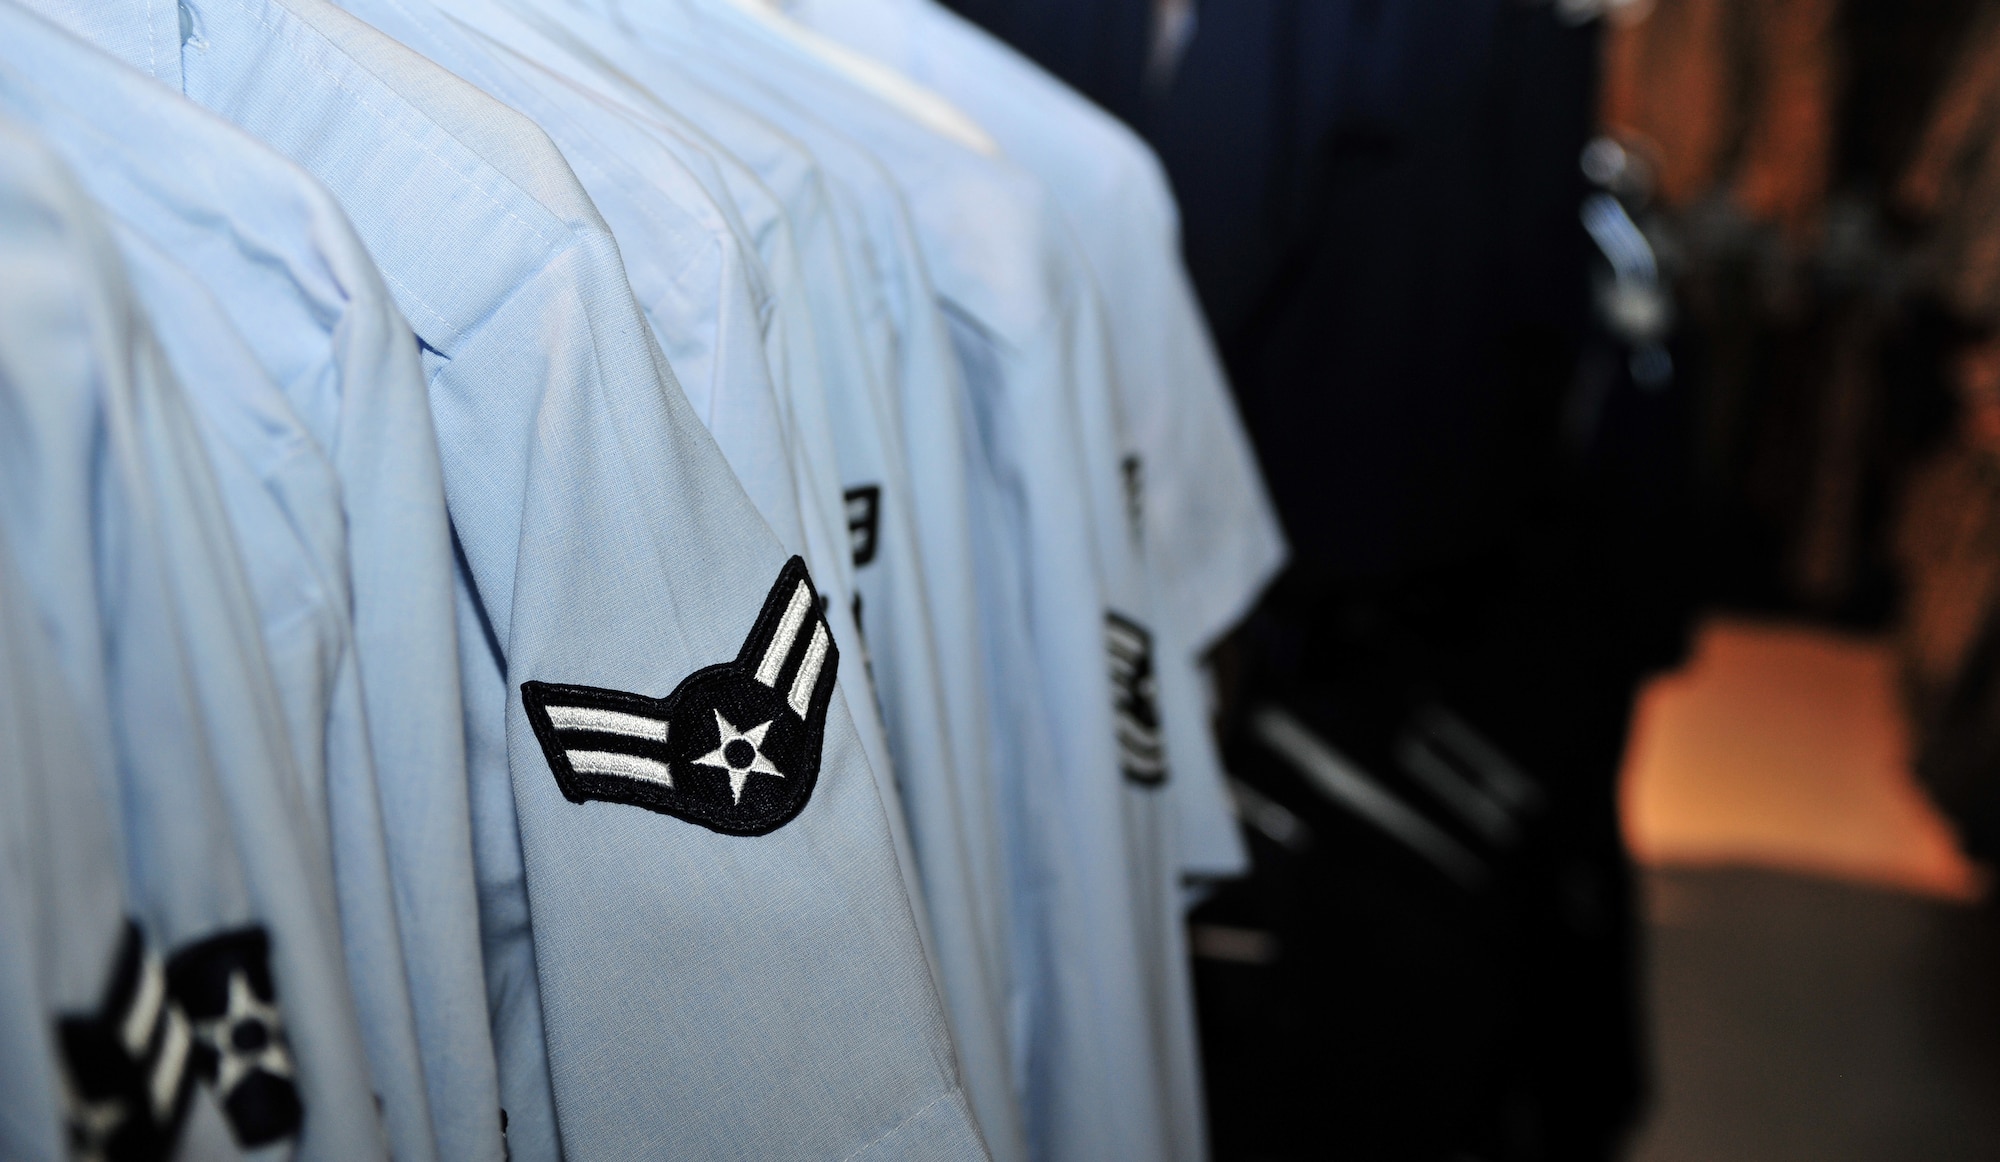 One of the many items available at the Airman’s Attic is a variety of pre-owned uniforms. Many more Items are offered like furniture, dishes, and civilian clothes. (U.S. Air Force Photo by Airman 1st Class Josh Slavin/Released)